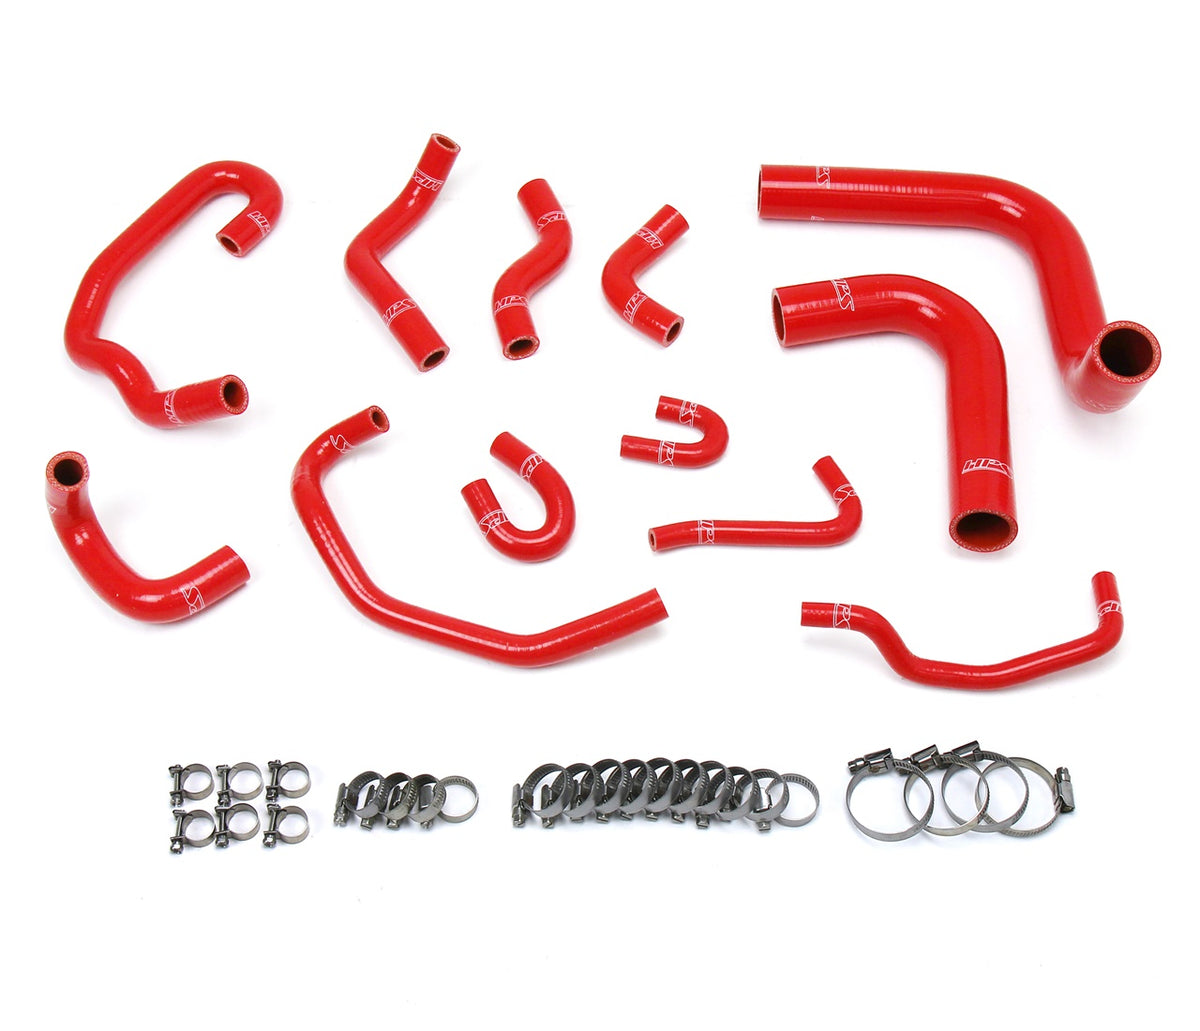 HPS Reinforced Red Silicone Radiator + Heater Hose Kit Coolant Toyota 93-95 Pickup 3.0L V6 57-1654-RED